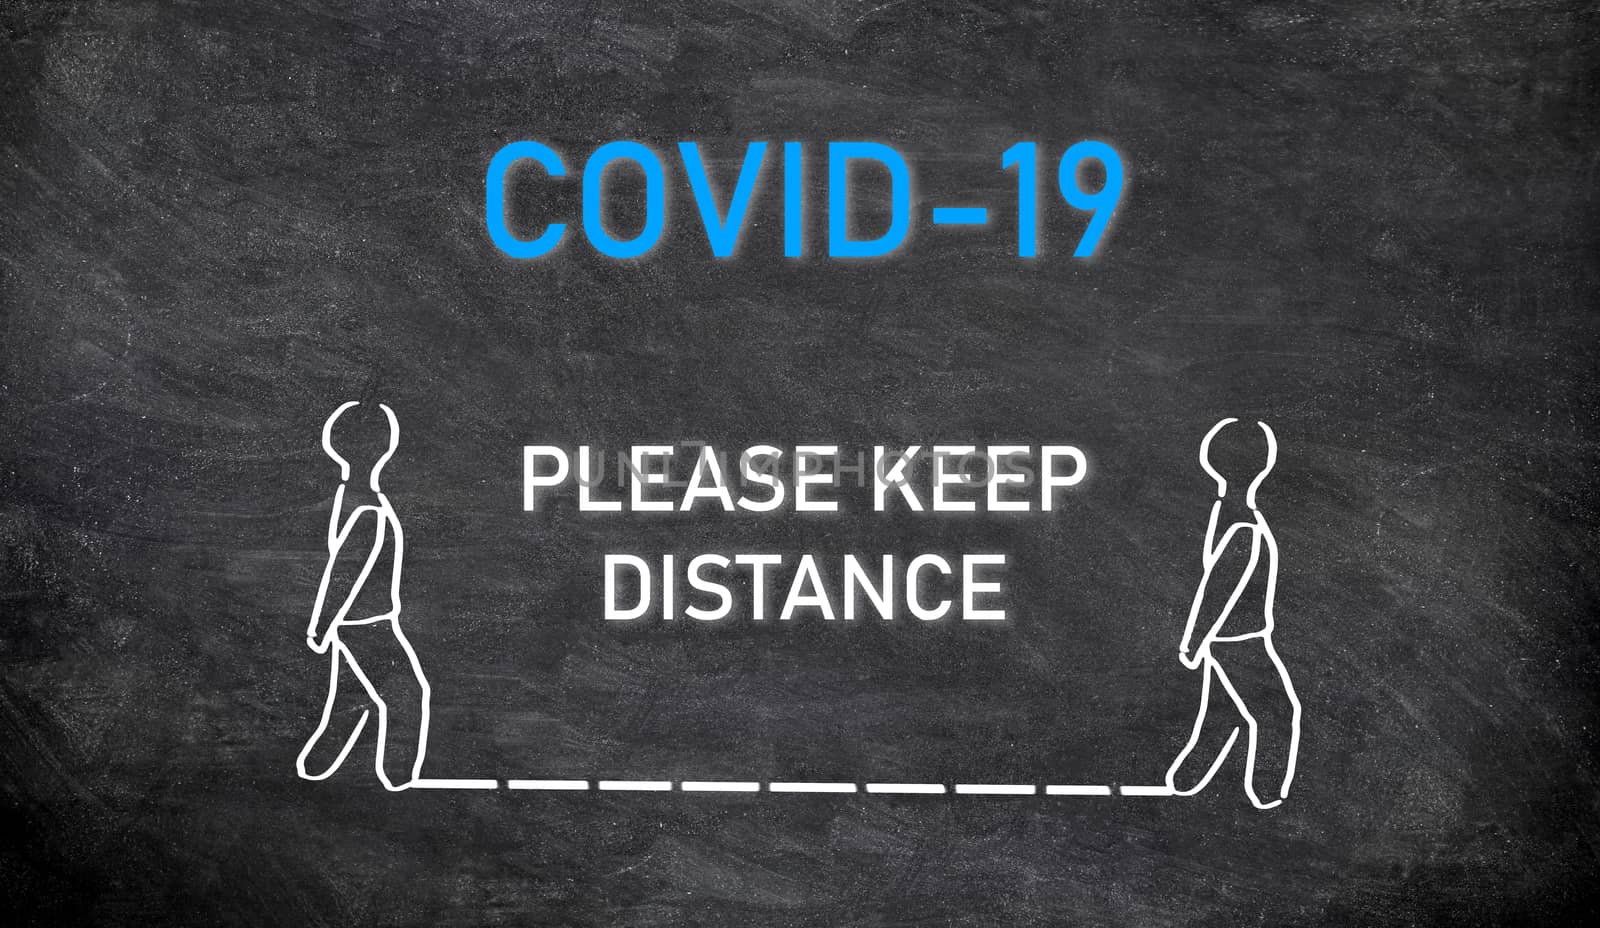 COVID-19 SOCIAL DISTANCING public announcement message board Please Keep distance of two meters or 6 feet between each person walking on street, or waiting in line at store or hospital.